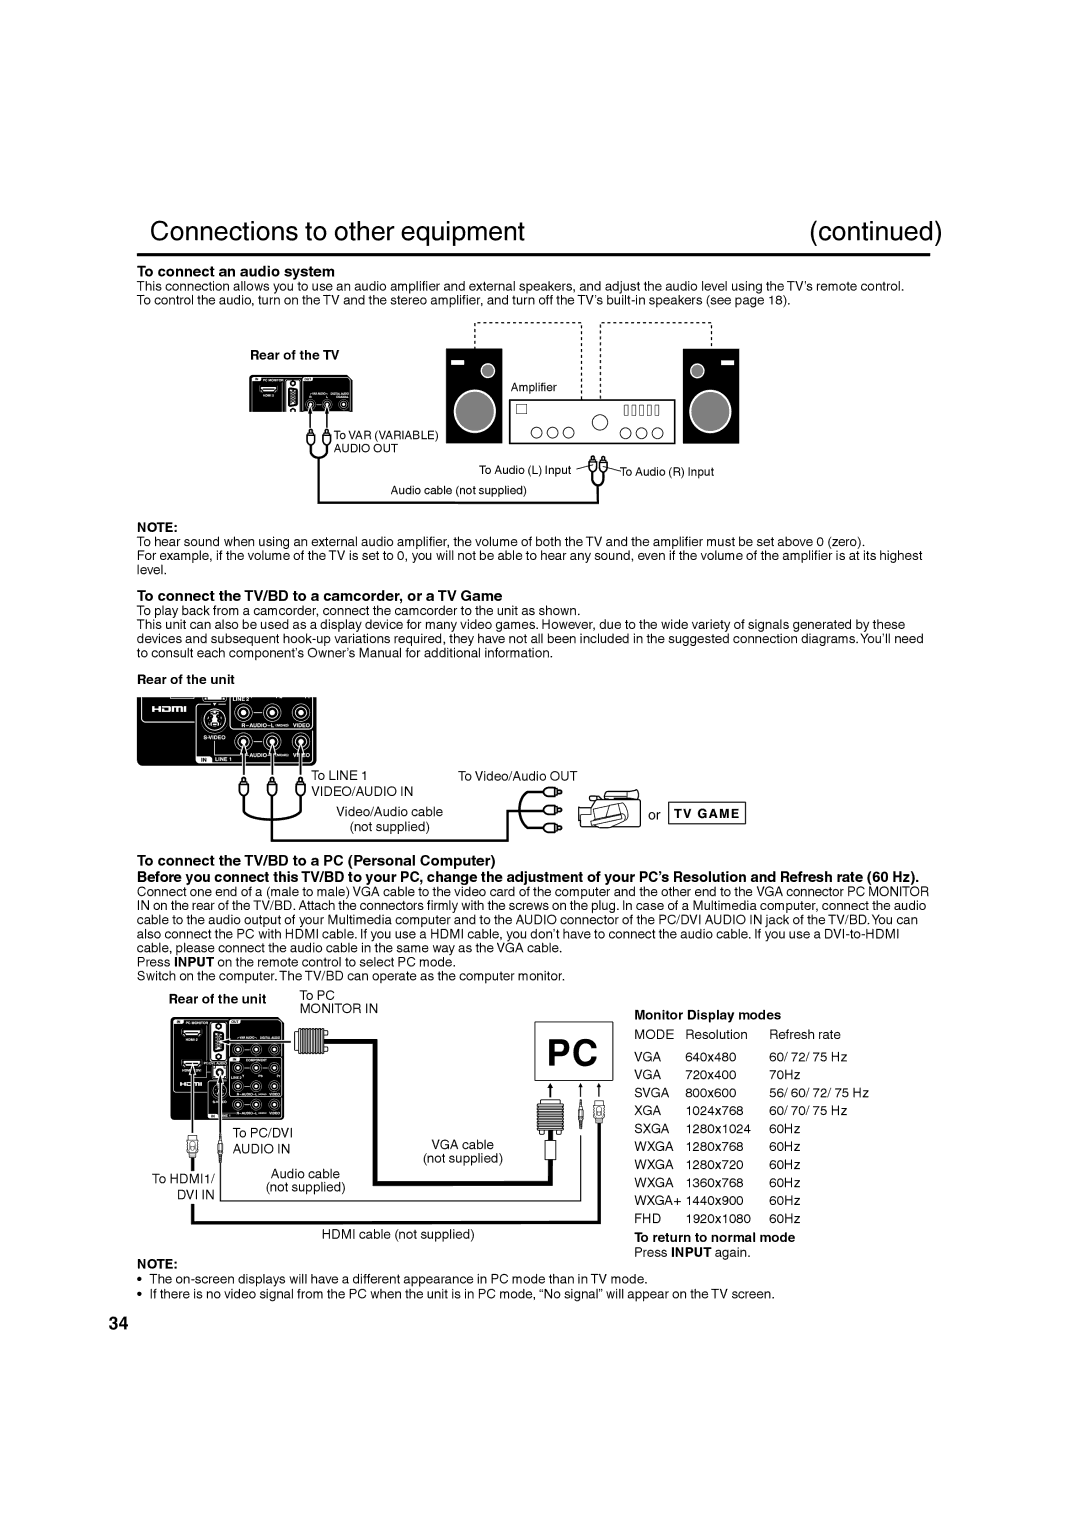 Hitachi L32BD304 manual To connect an audio system, To connect the TV/BD to a camcorder, or a TV Game, Rear of the TV 